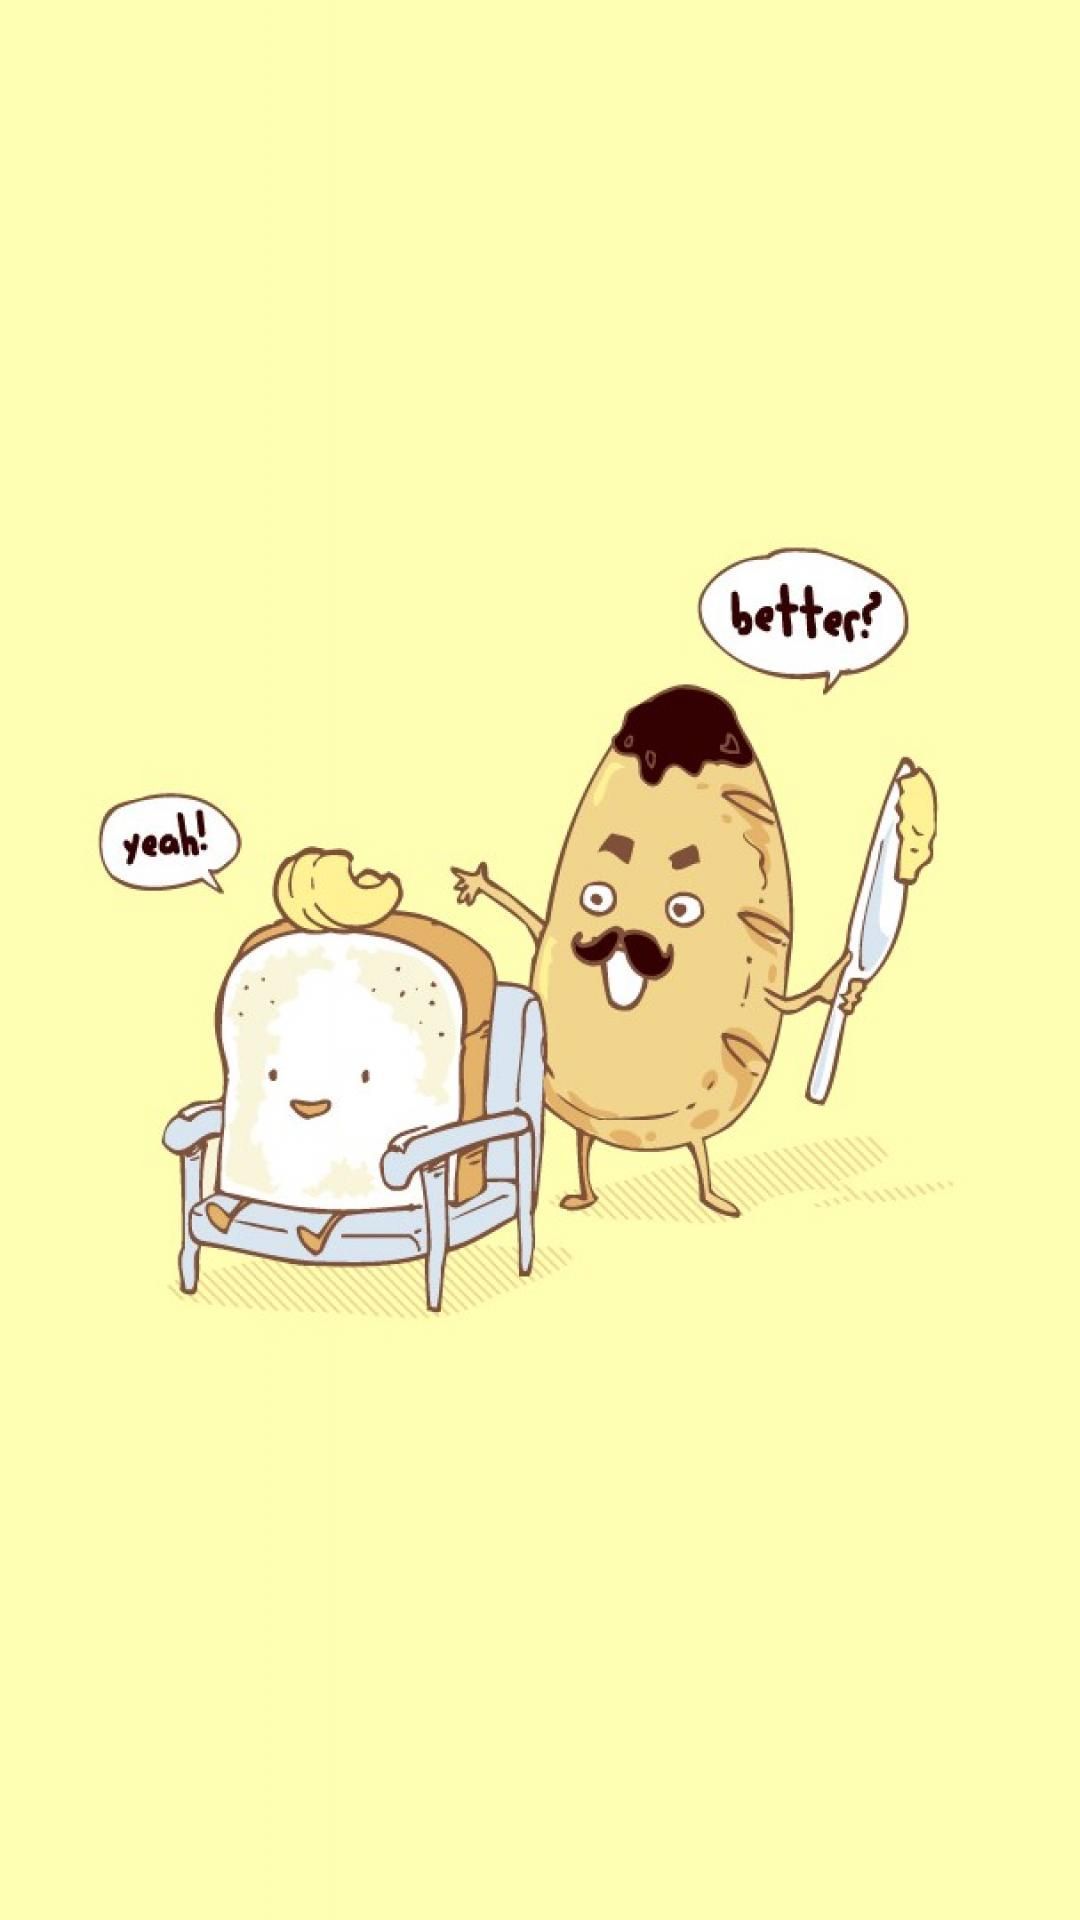 Butter bun and Bread iPhone wallpaper. Tap to see more funny iPhone wallpaper. Funny doodles, Funny illustration, Funny drawings